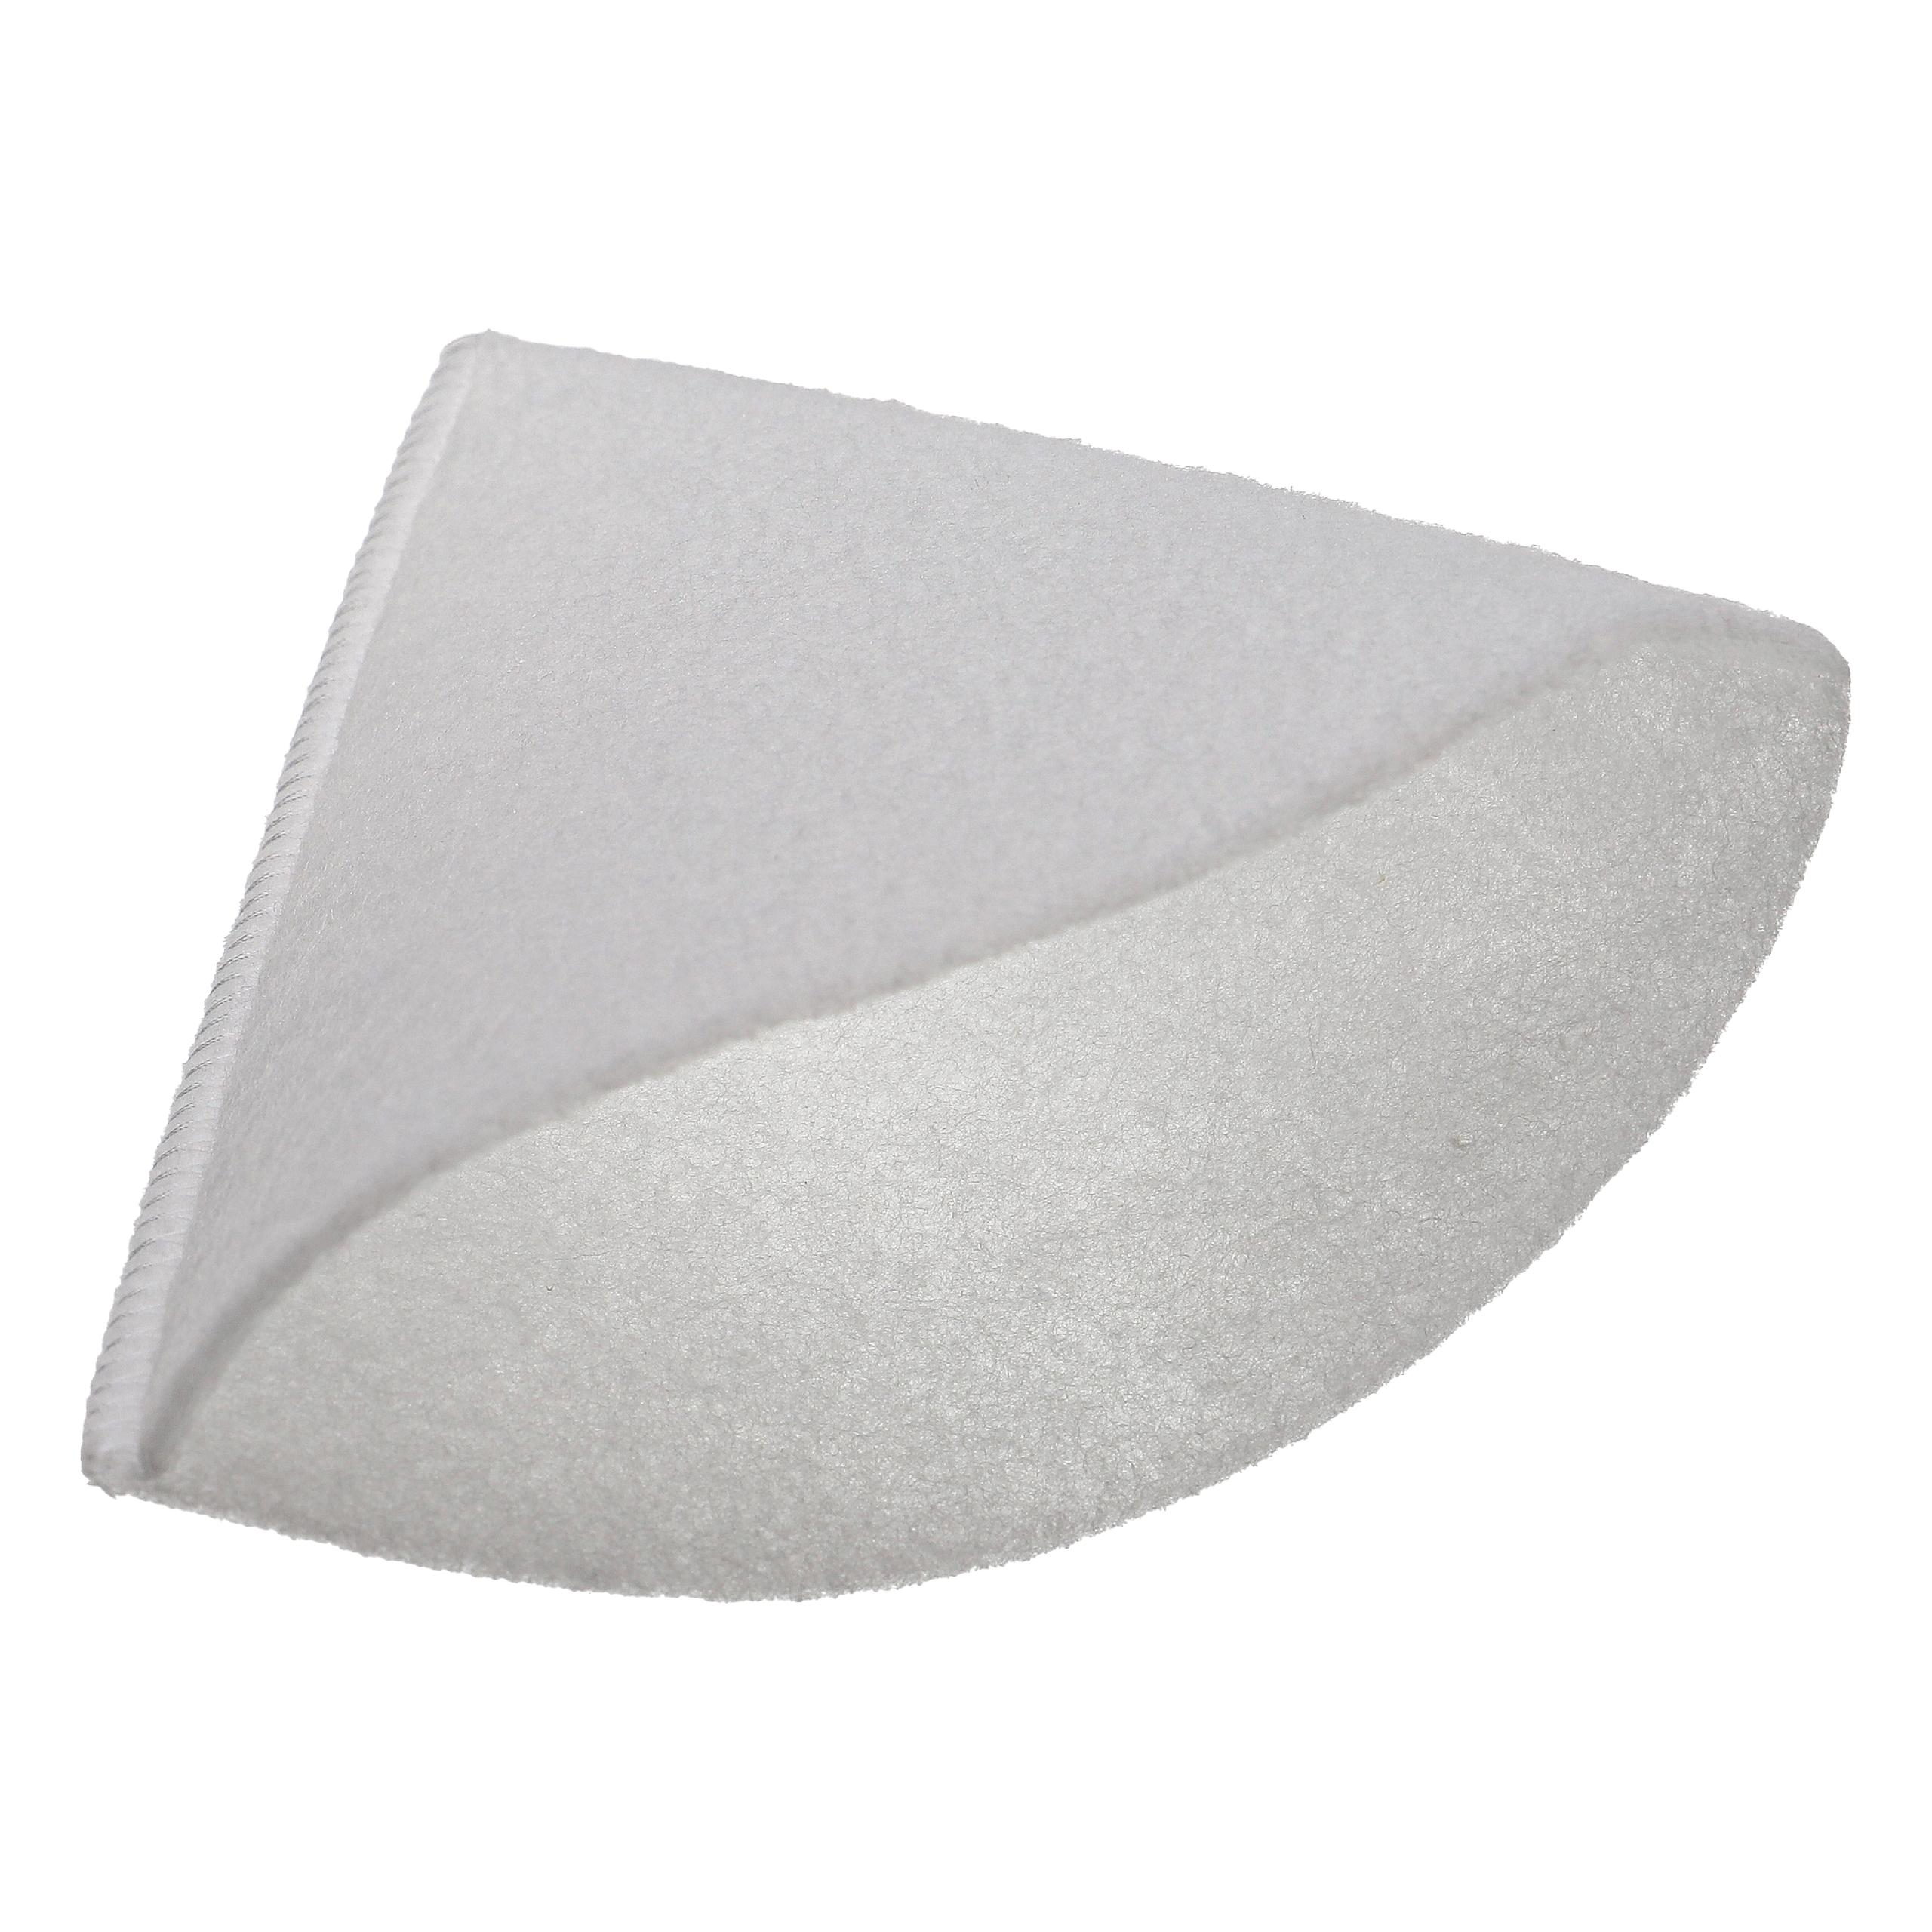 100x Conical Filter replaces Zehnder 990320031 for Zehnder Ventilation System - Exhaust Air Filter G4, DN 100